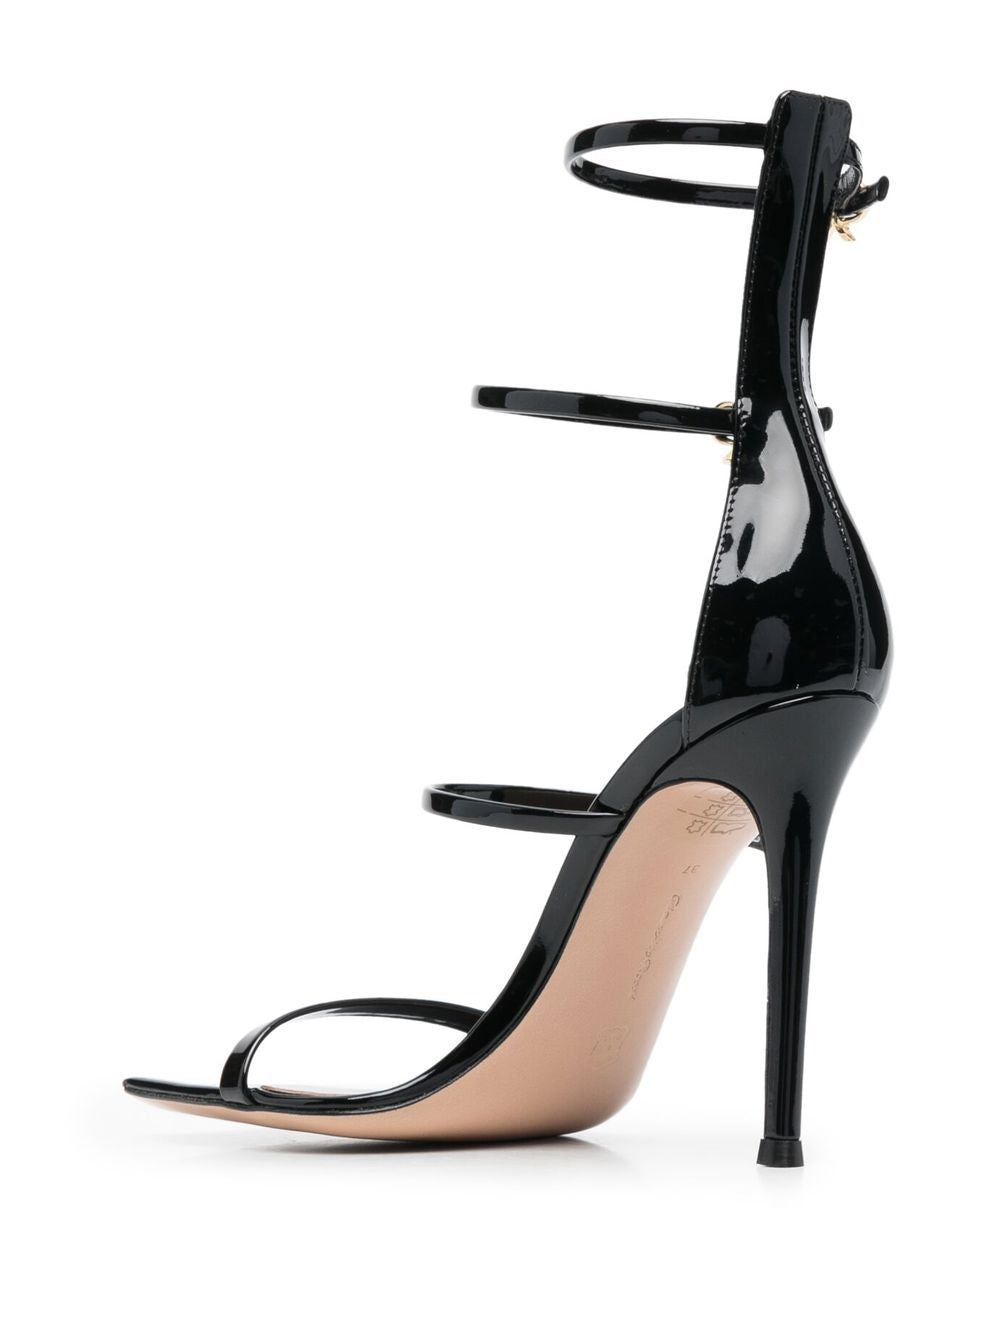 GIANVITO ROSSI Black Sandals for Women - FW22 Collection